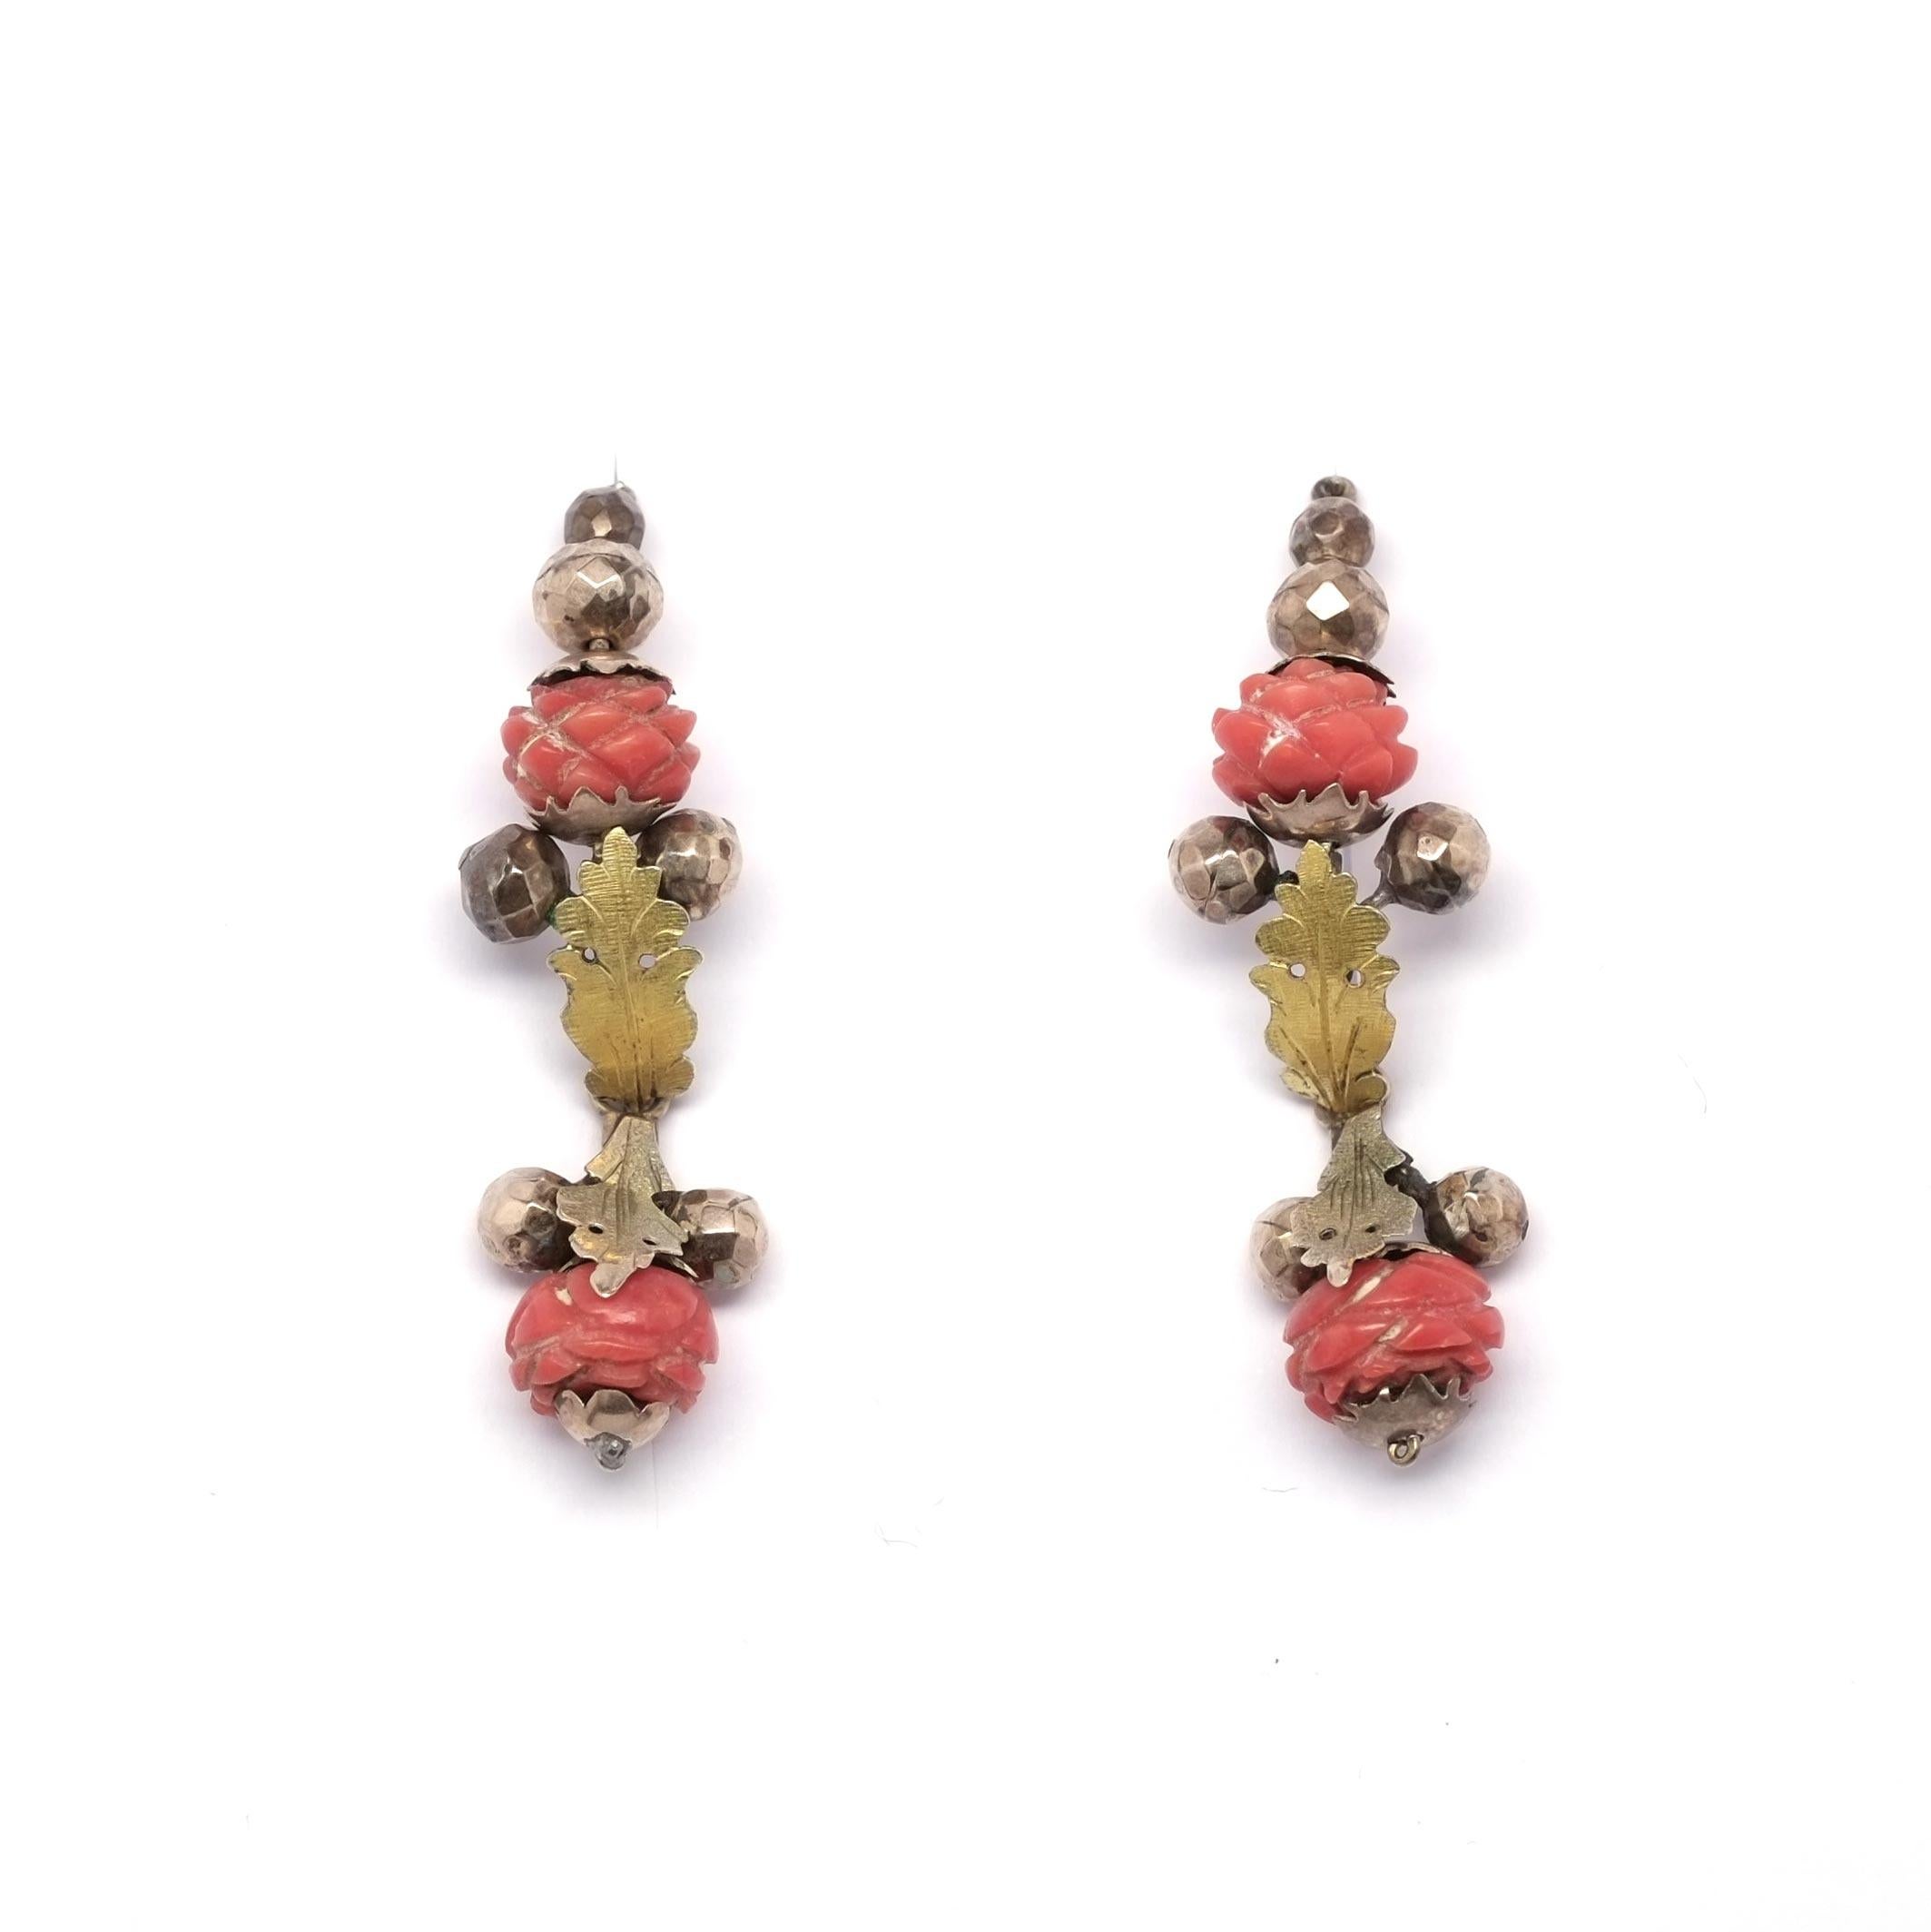 At some point during the first half of the 19th century these gorgeous gold earrings where handcrafted at the very north of Italy, Alto Adige. These gold earrings are set with natural coral spheres which are hand engraved according to tradition, the